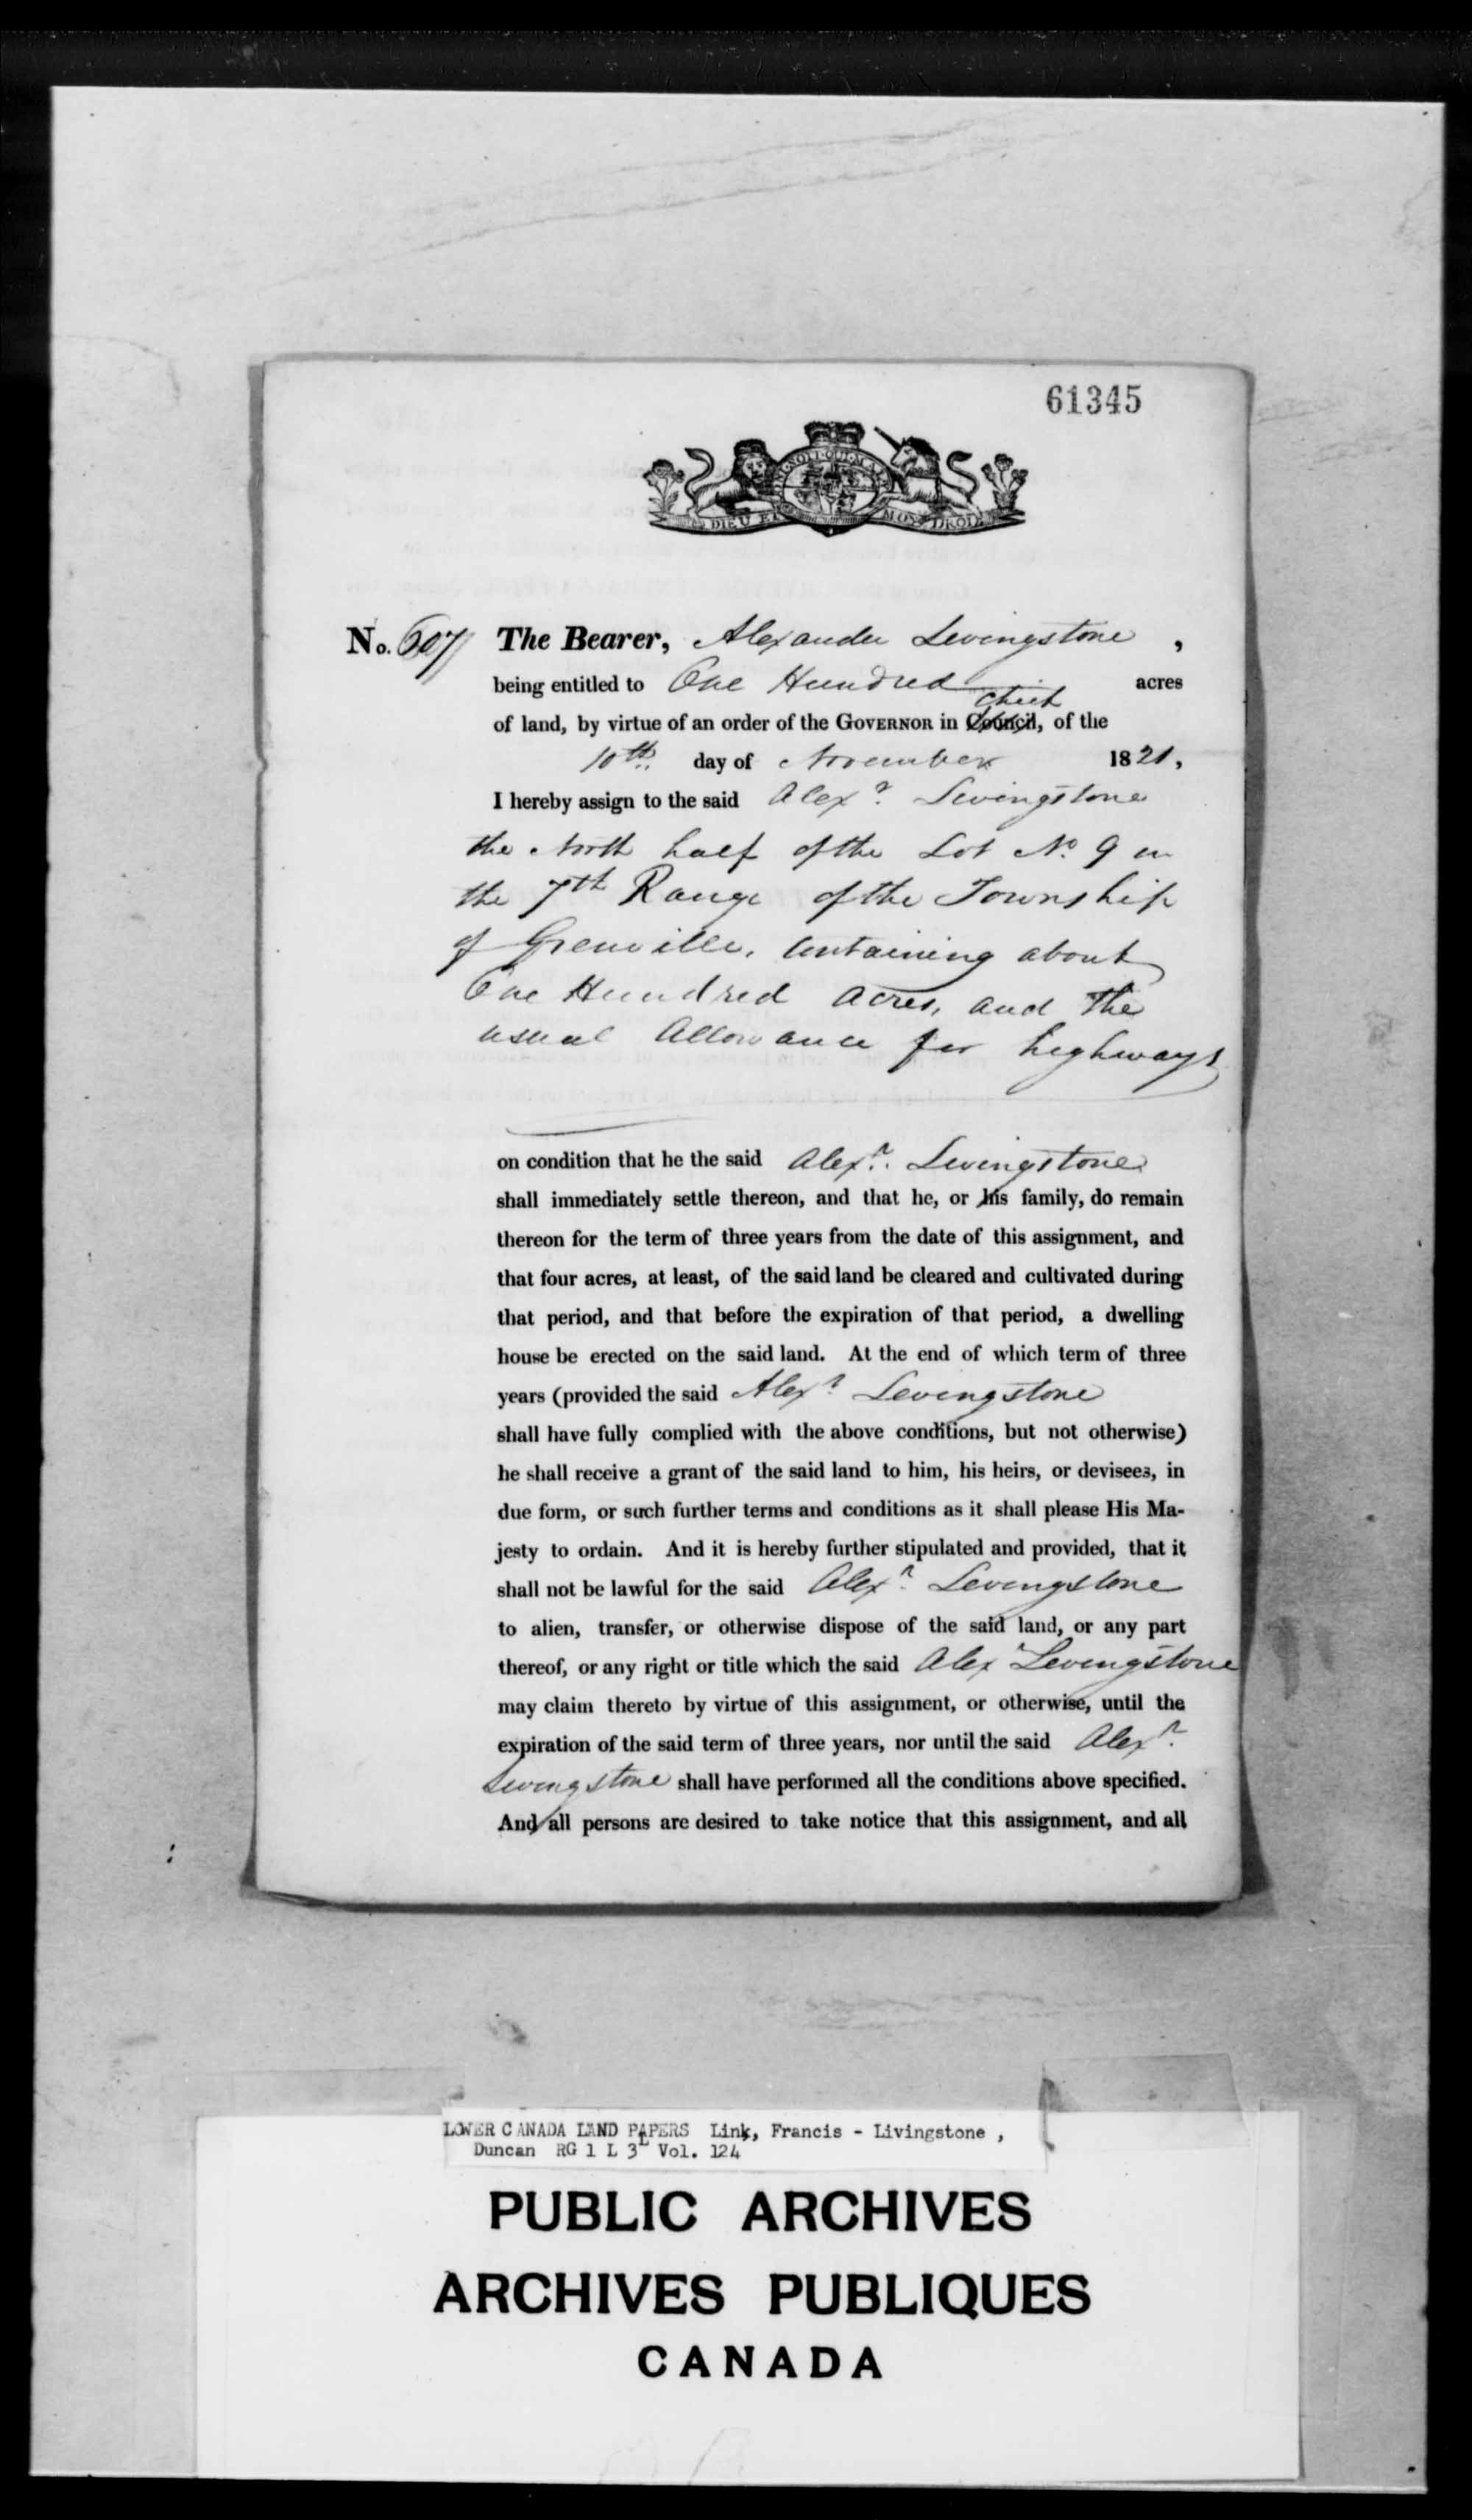 Digitized page of  for Image No.: e008706194